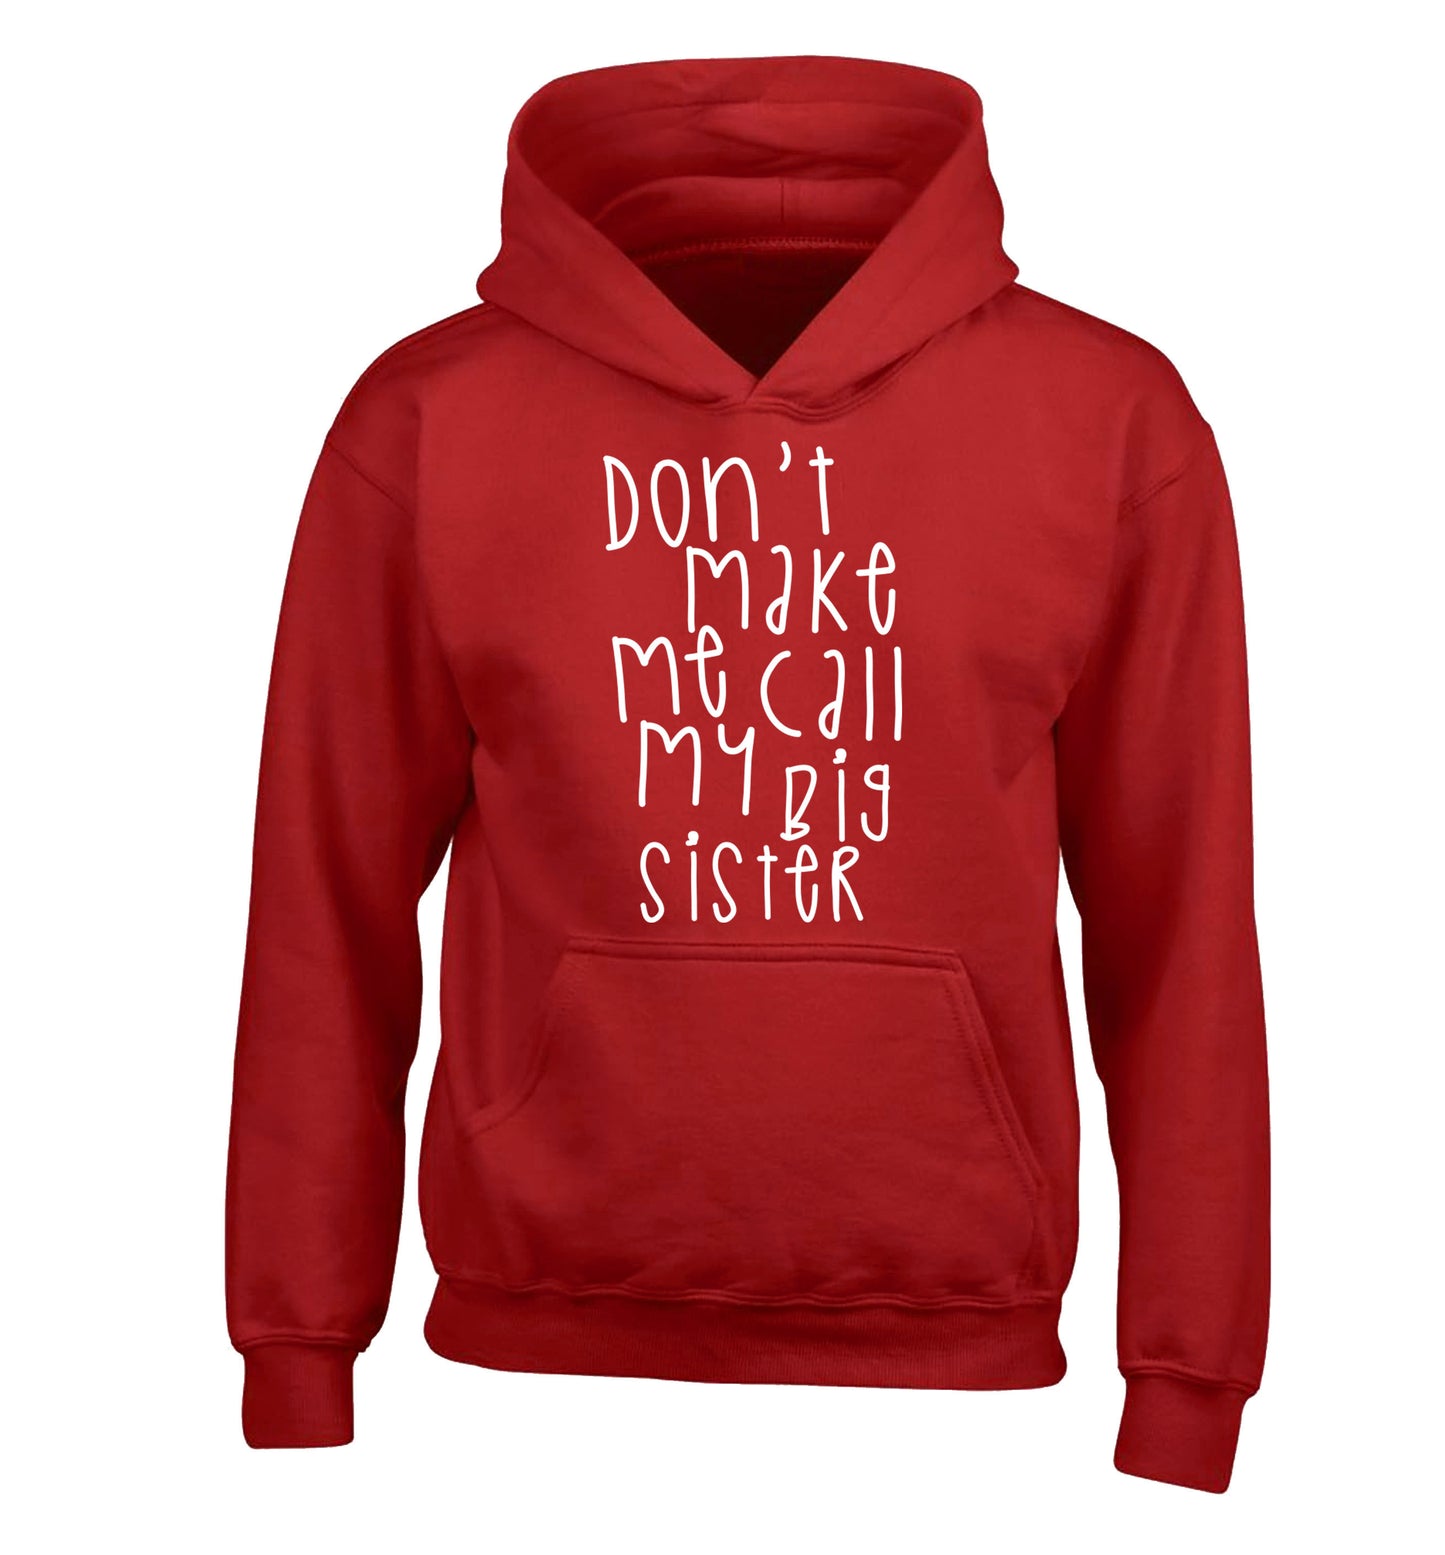 Don't make me call my big sister children's red hoodie 12-14 Years